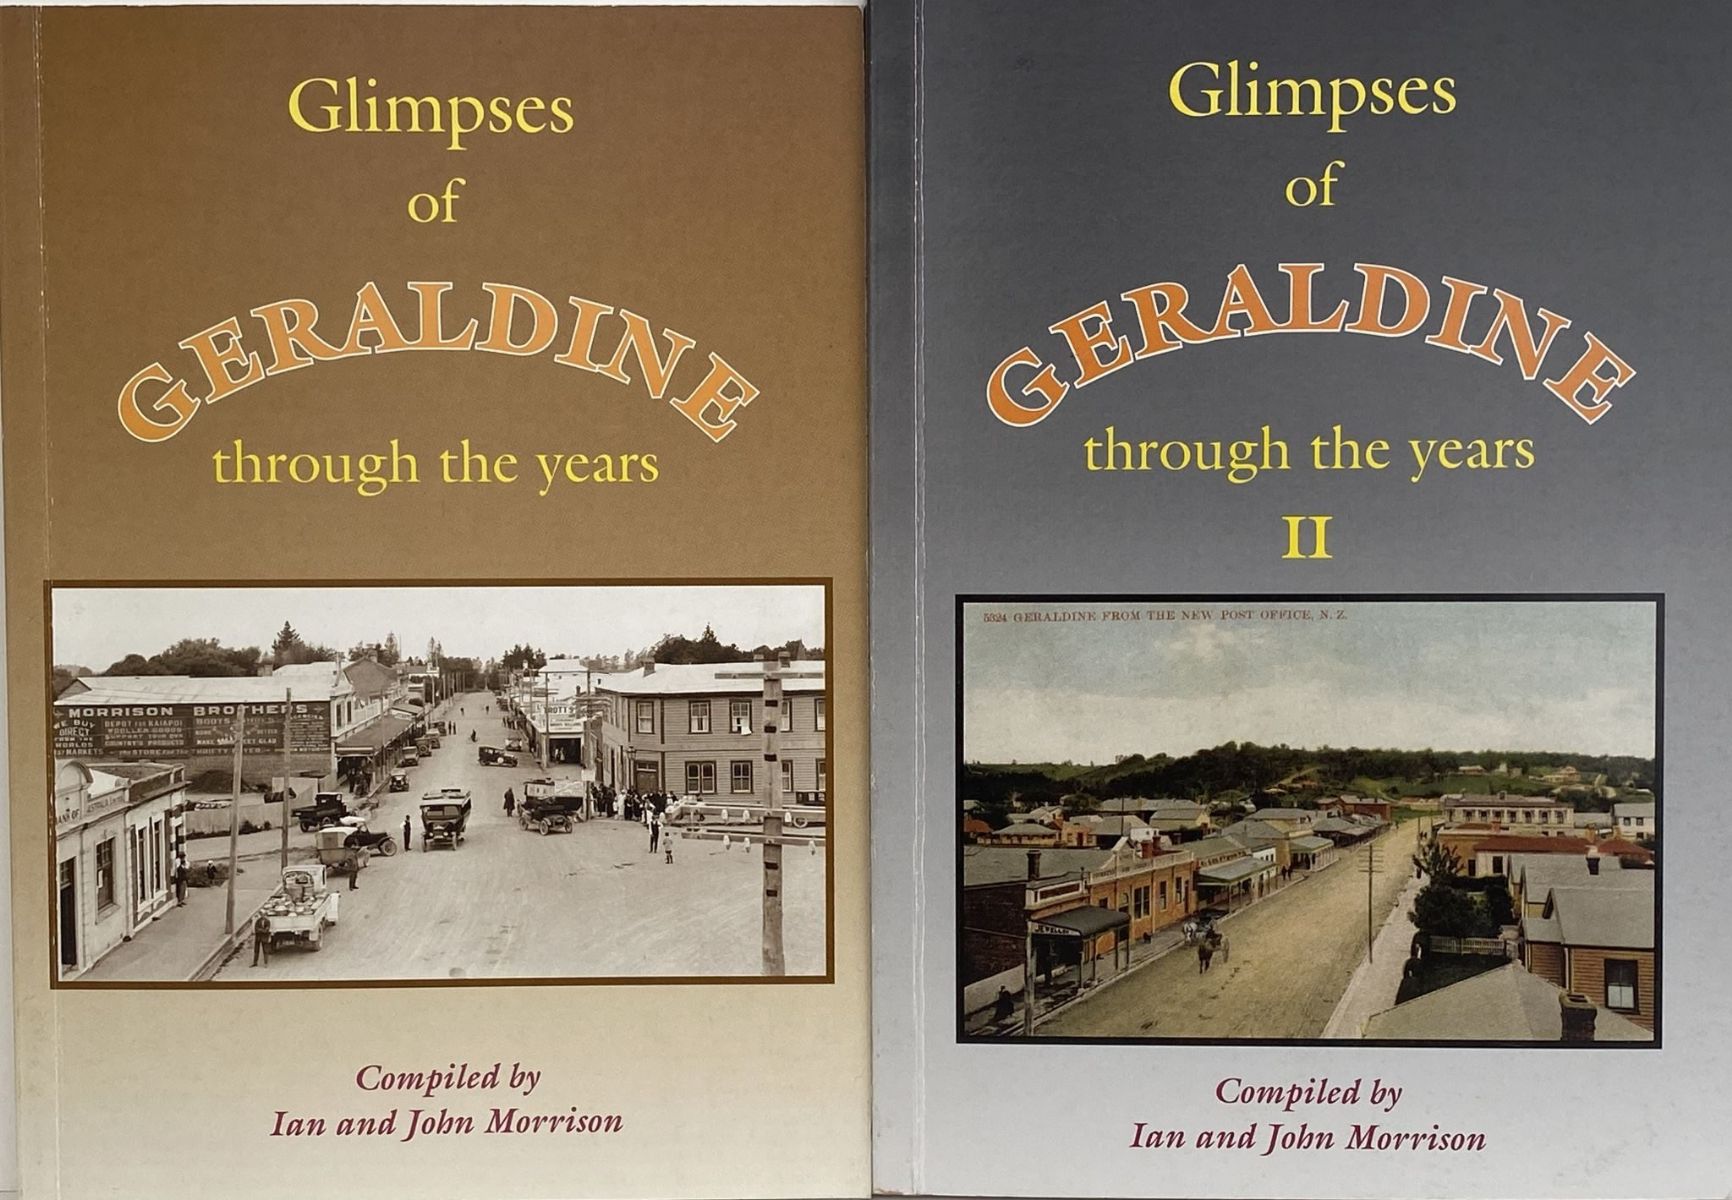 GLIMPSES OF GERALDINE THROUGH THE YEARS: Volumes 1+2